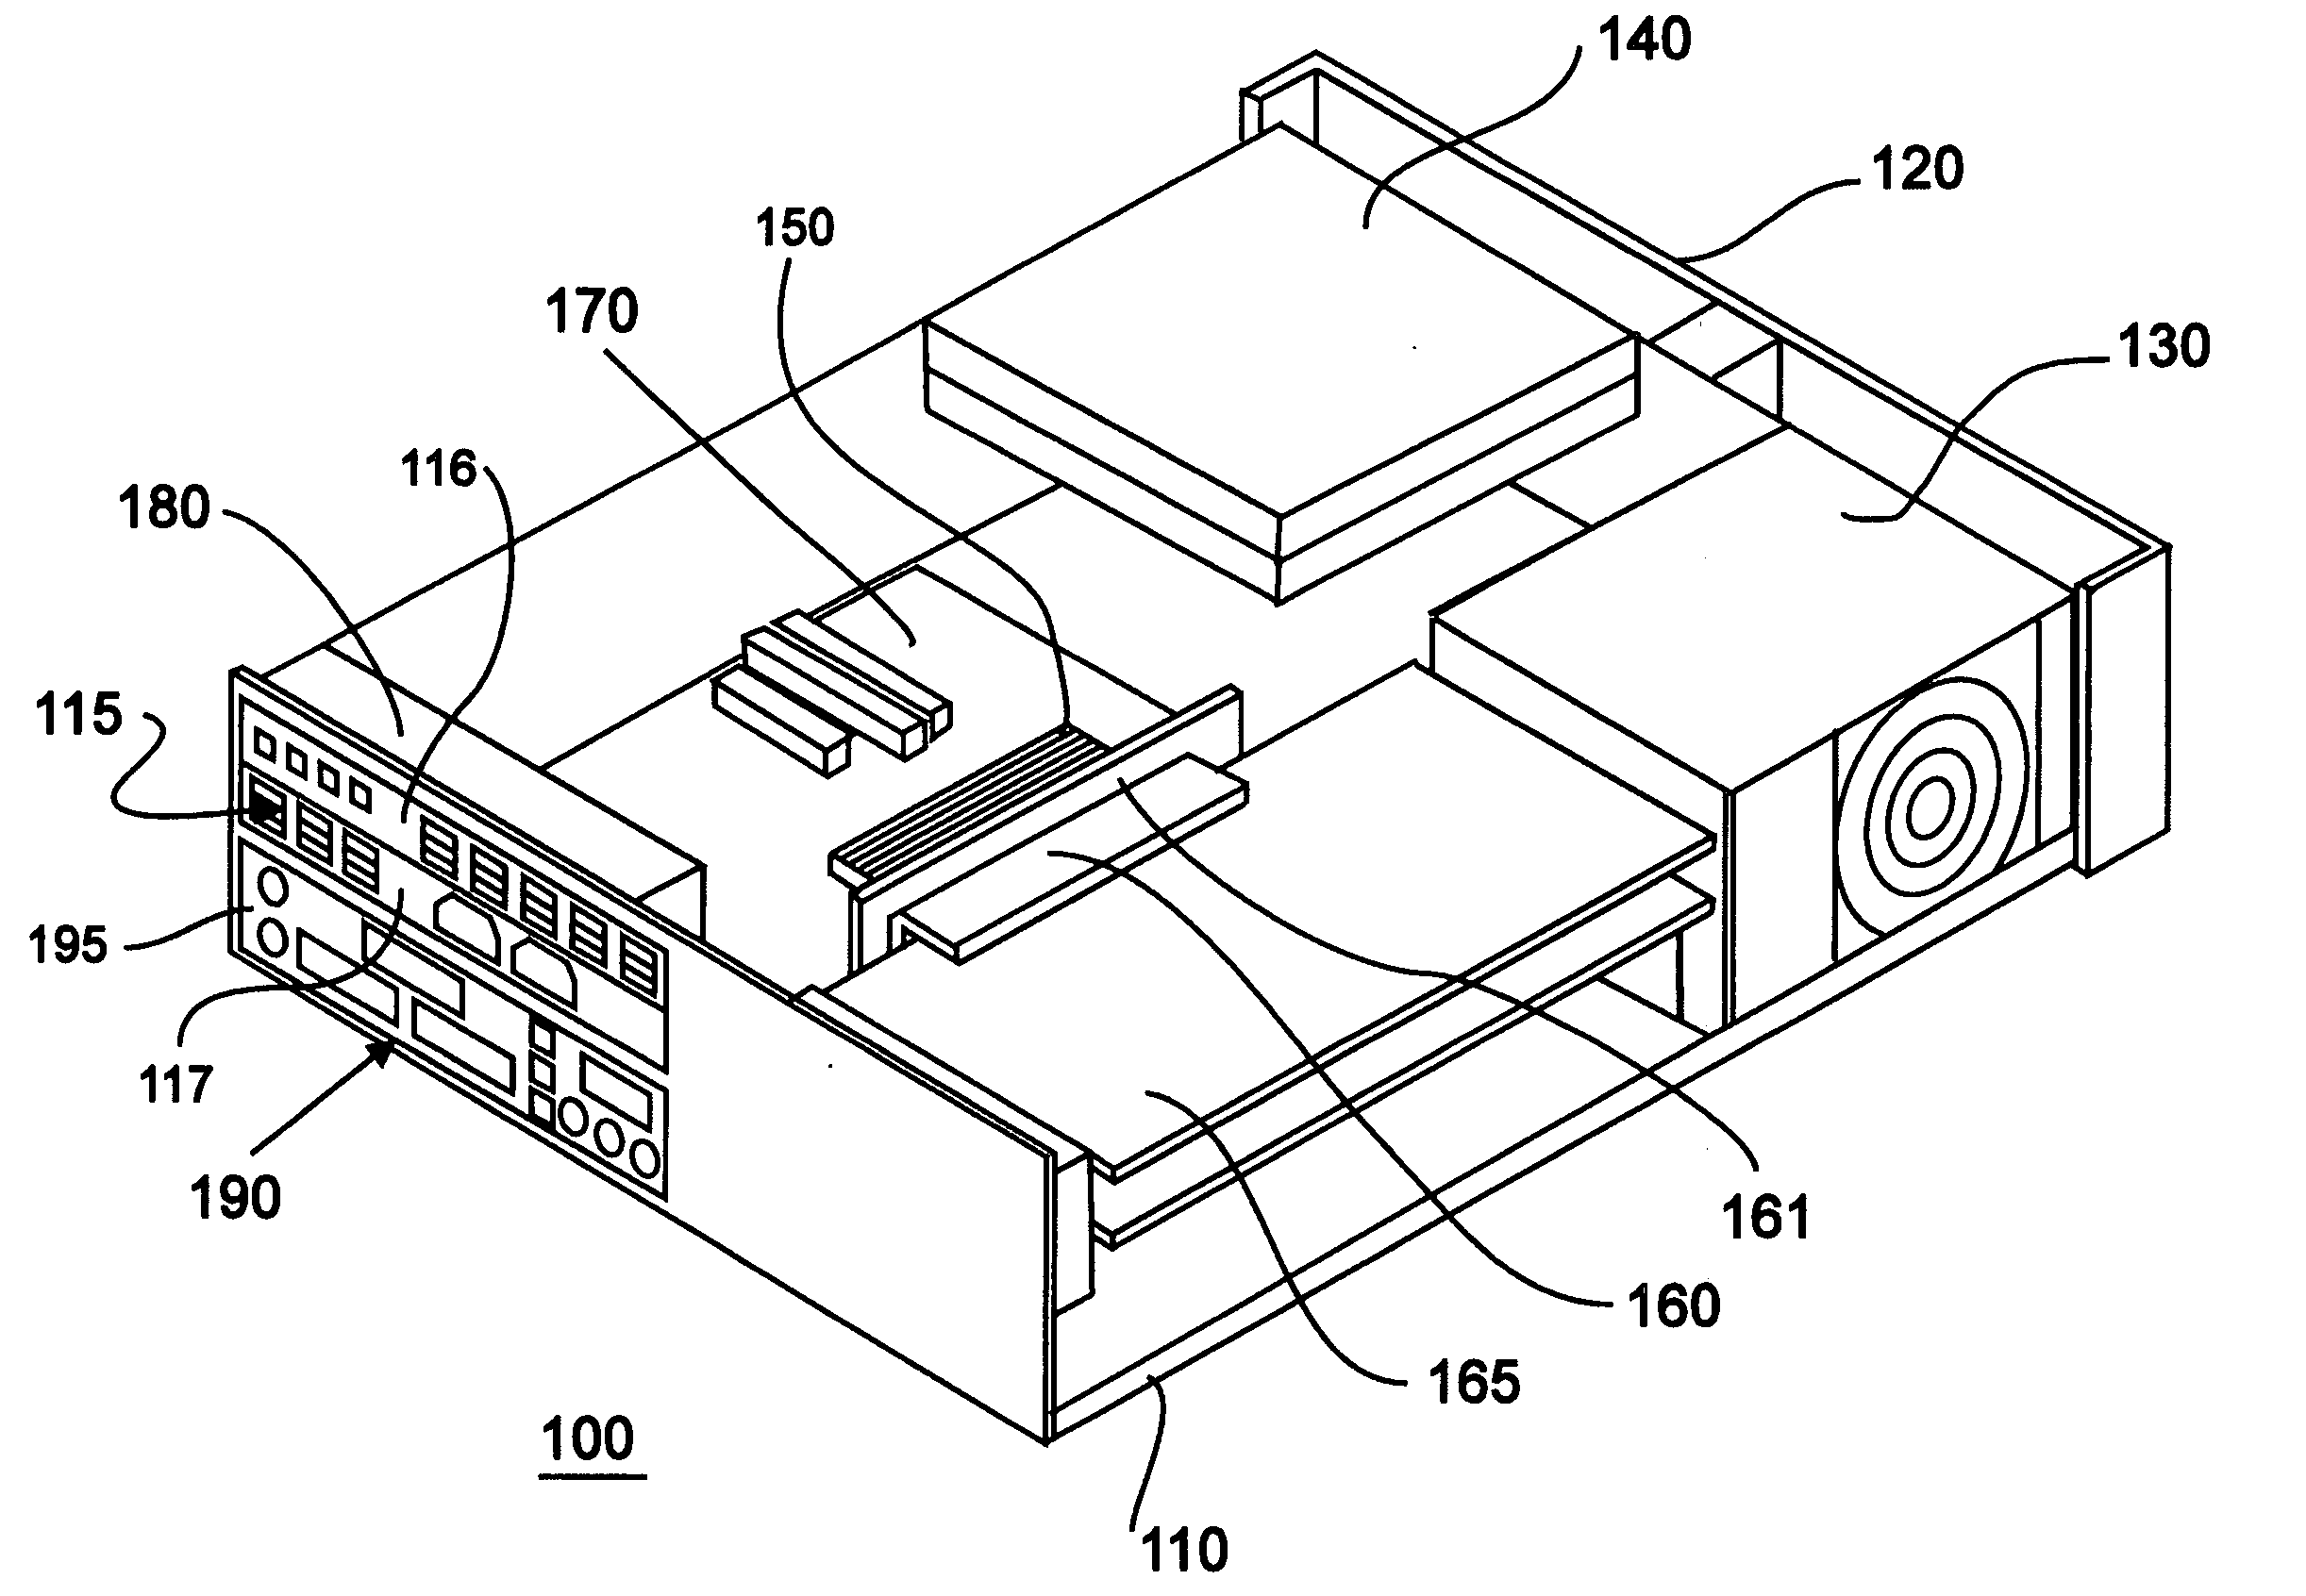 System and method for a flexible point of sale terminal having a common chassis and utilizing a PC motherboard